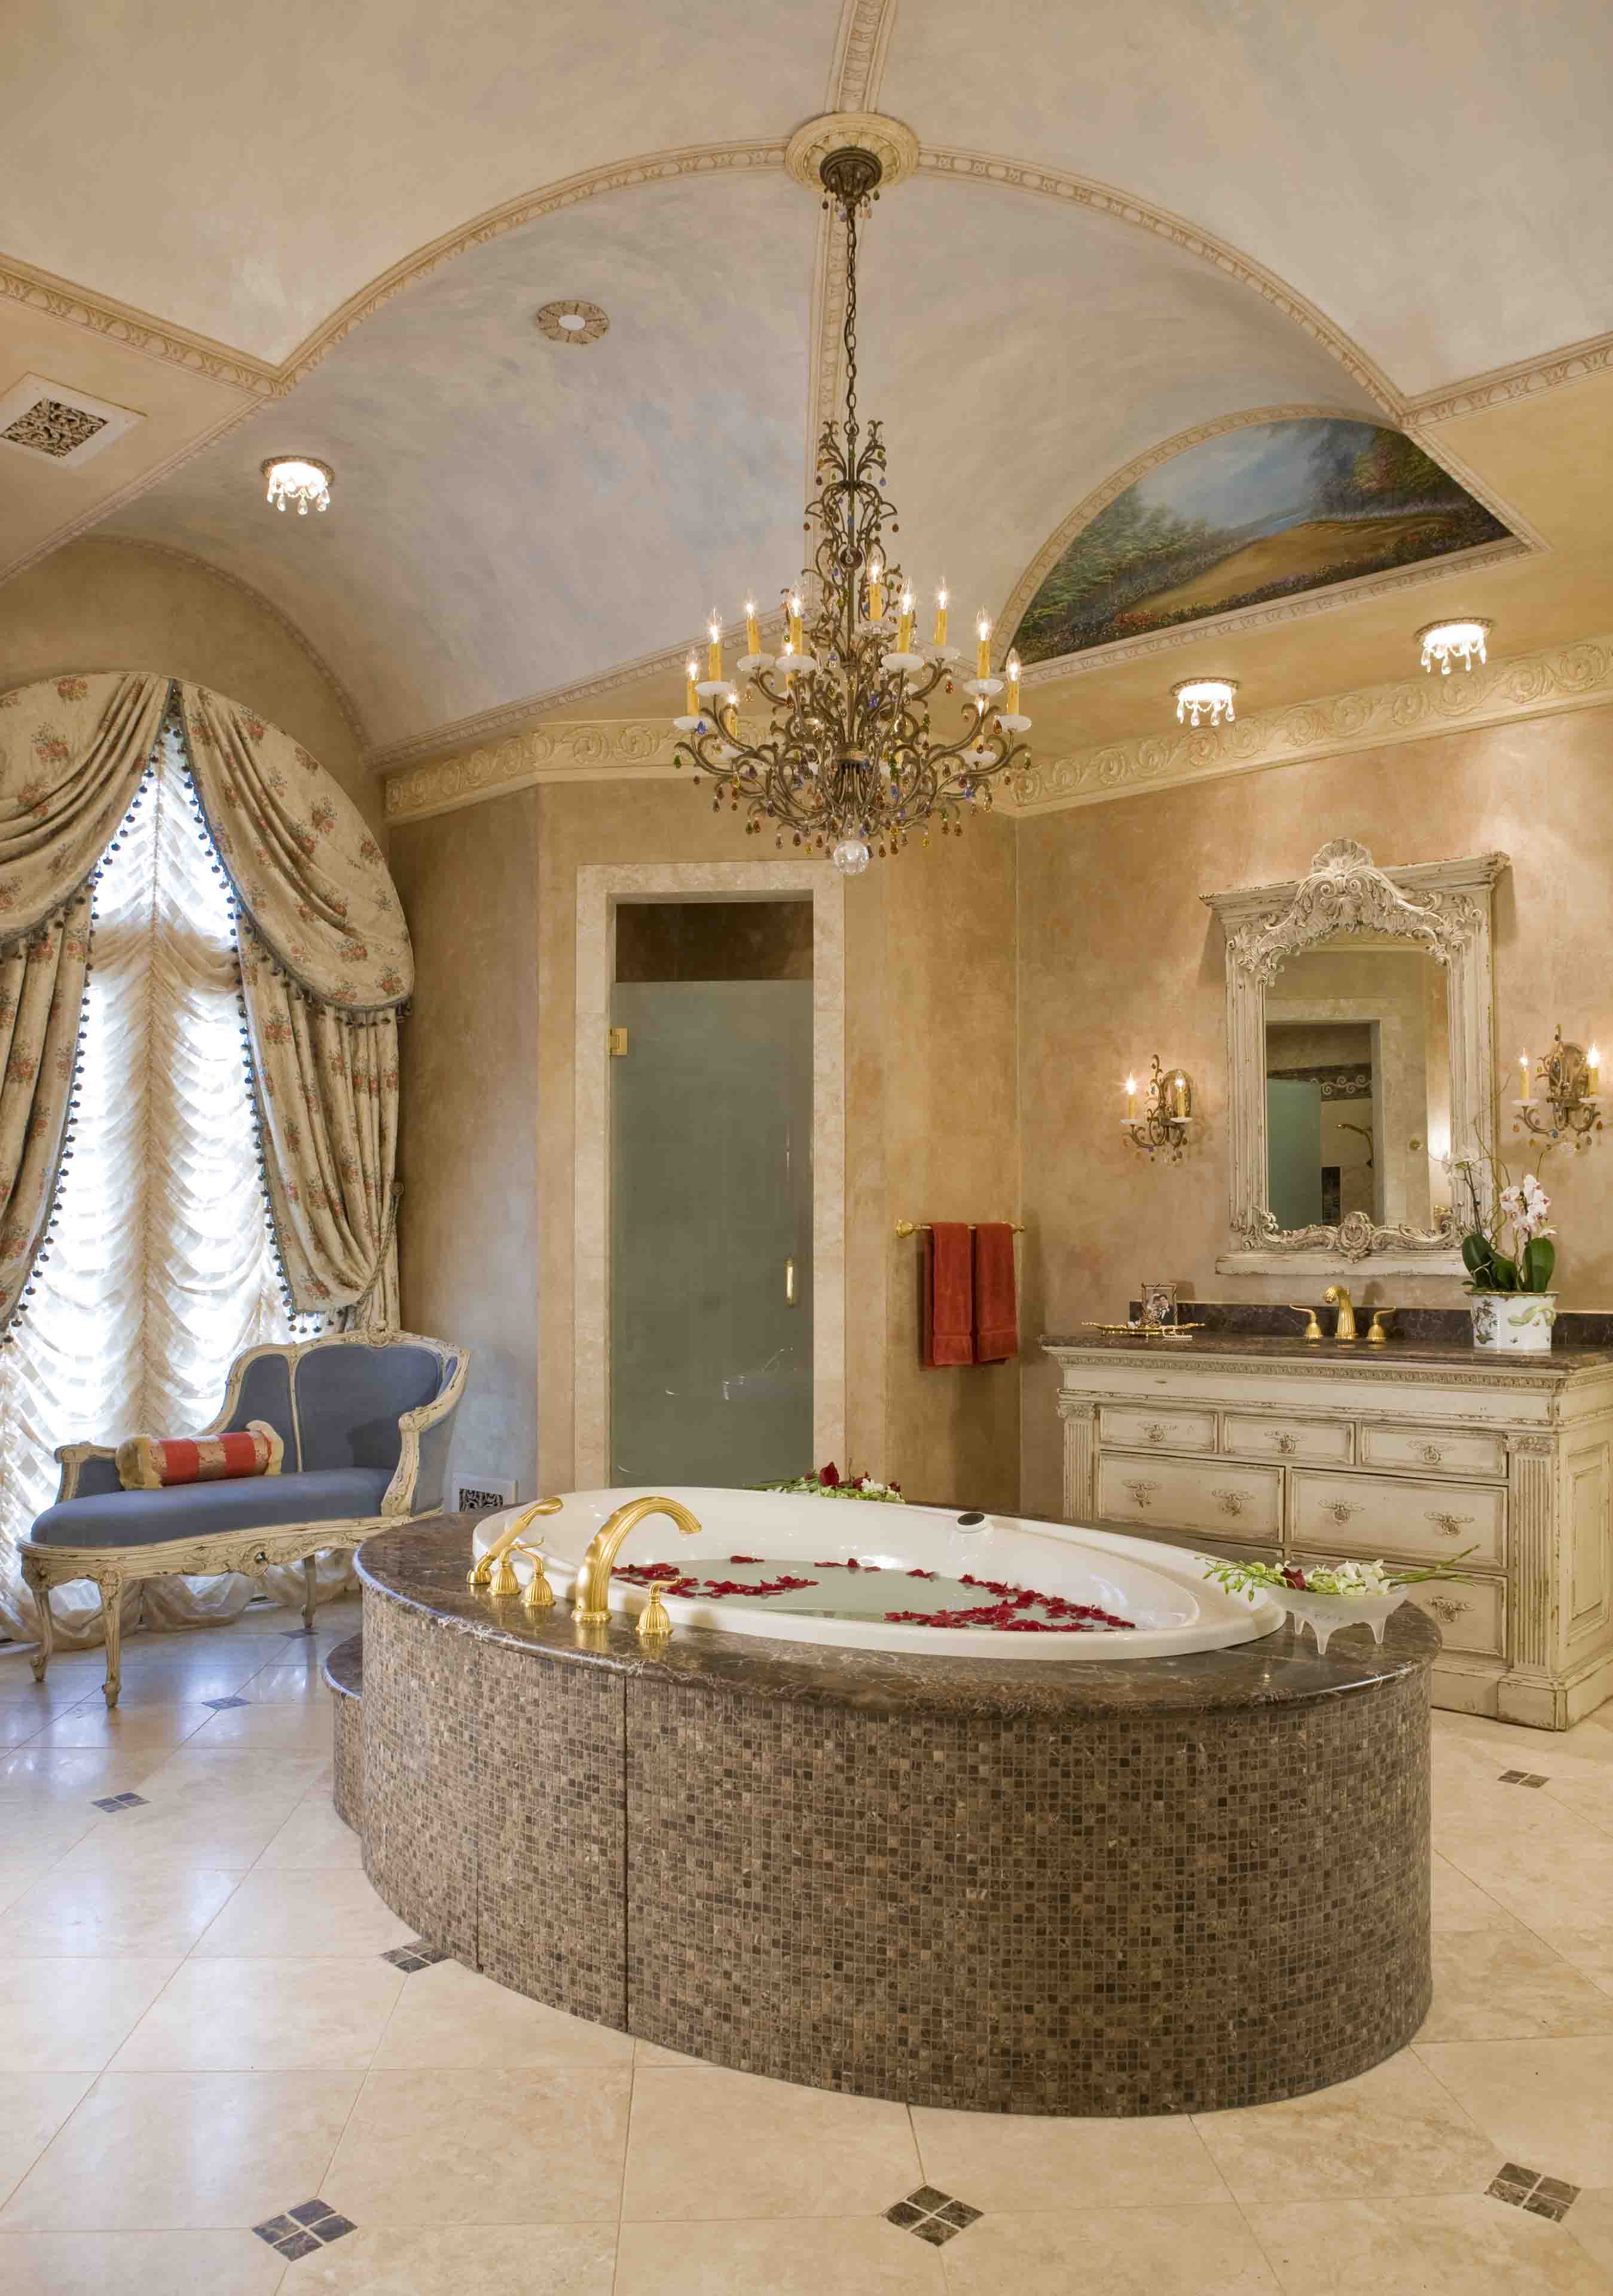 Luxury master bathroom with spa and antique cabinetry